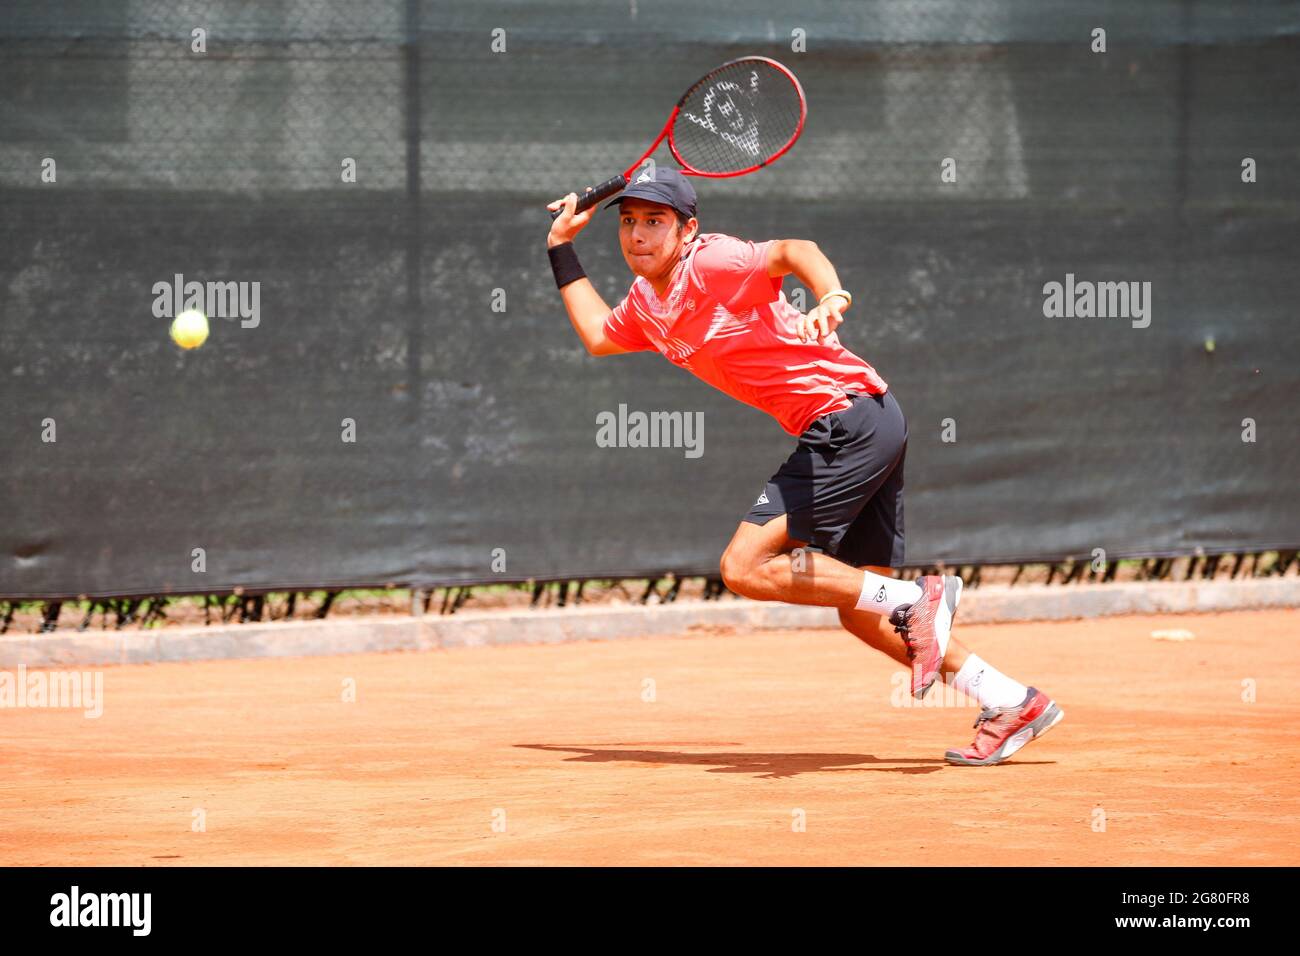 Milan, Italy. 16th July, 2021. Gonzalo Bueno from Peru during Bonfiglio  Trophy 2021, Tennis Internationals in Milan, Italy, July 16 2021 Credit:  Independent Photo Agency/Alamy Live News Stock Photo - Alamy